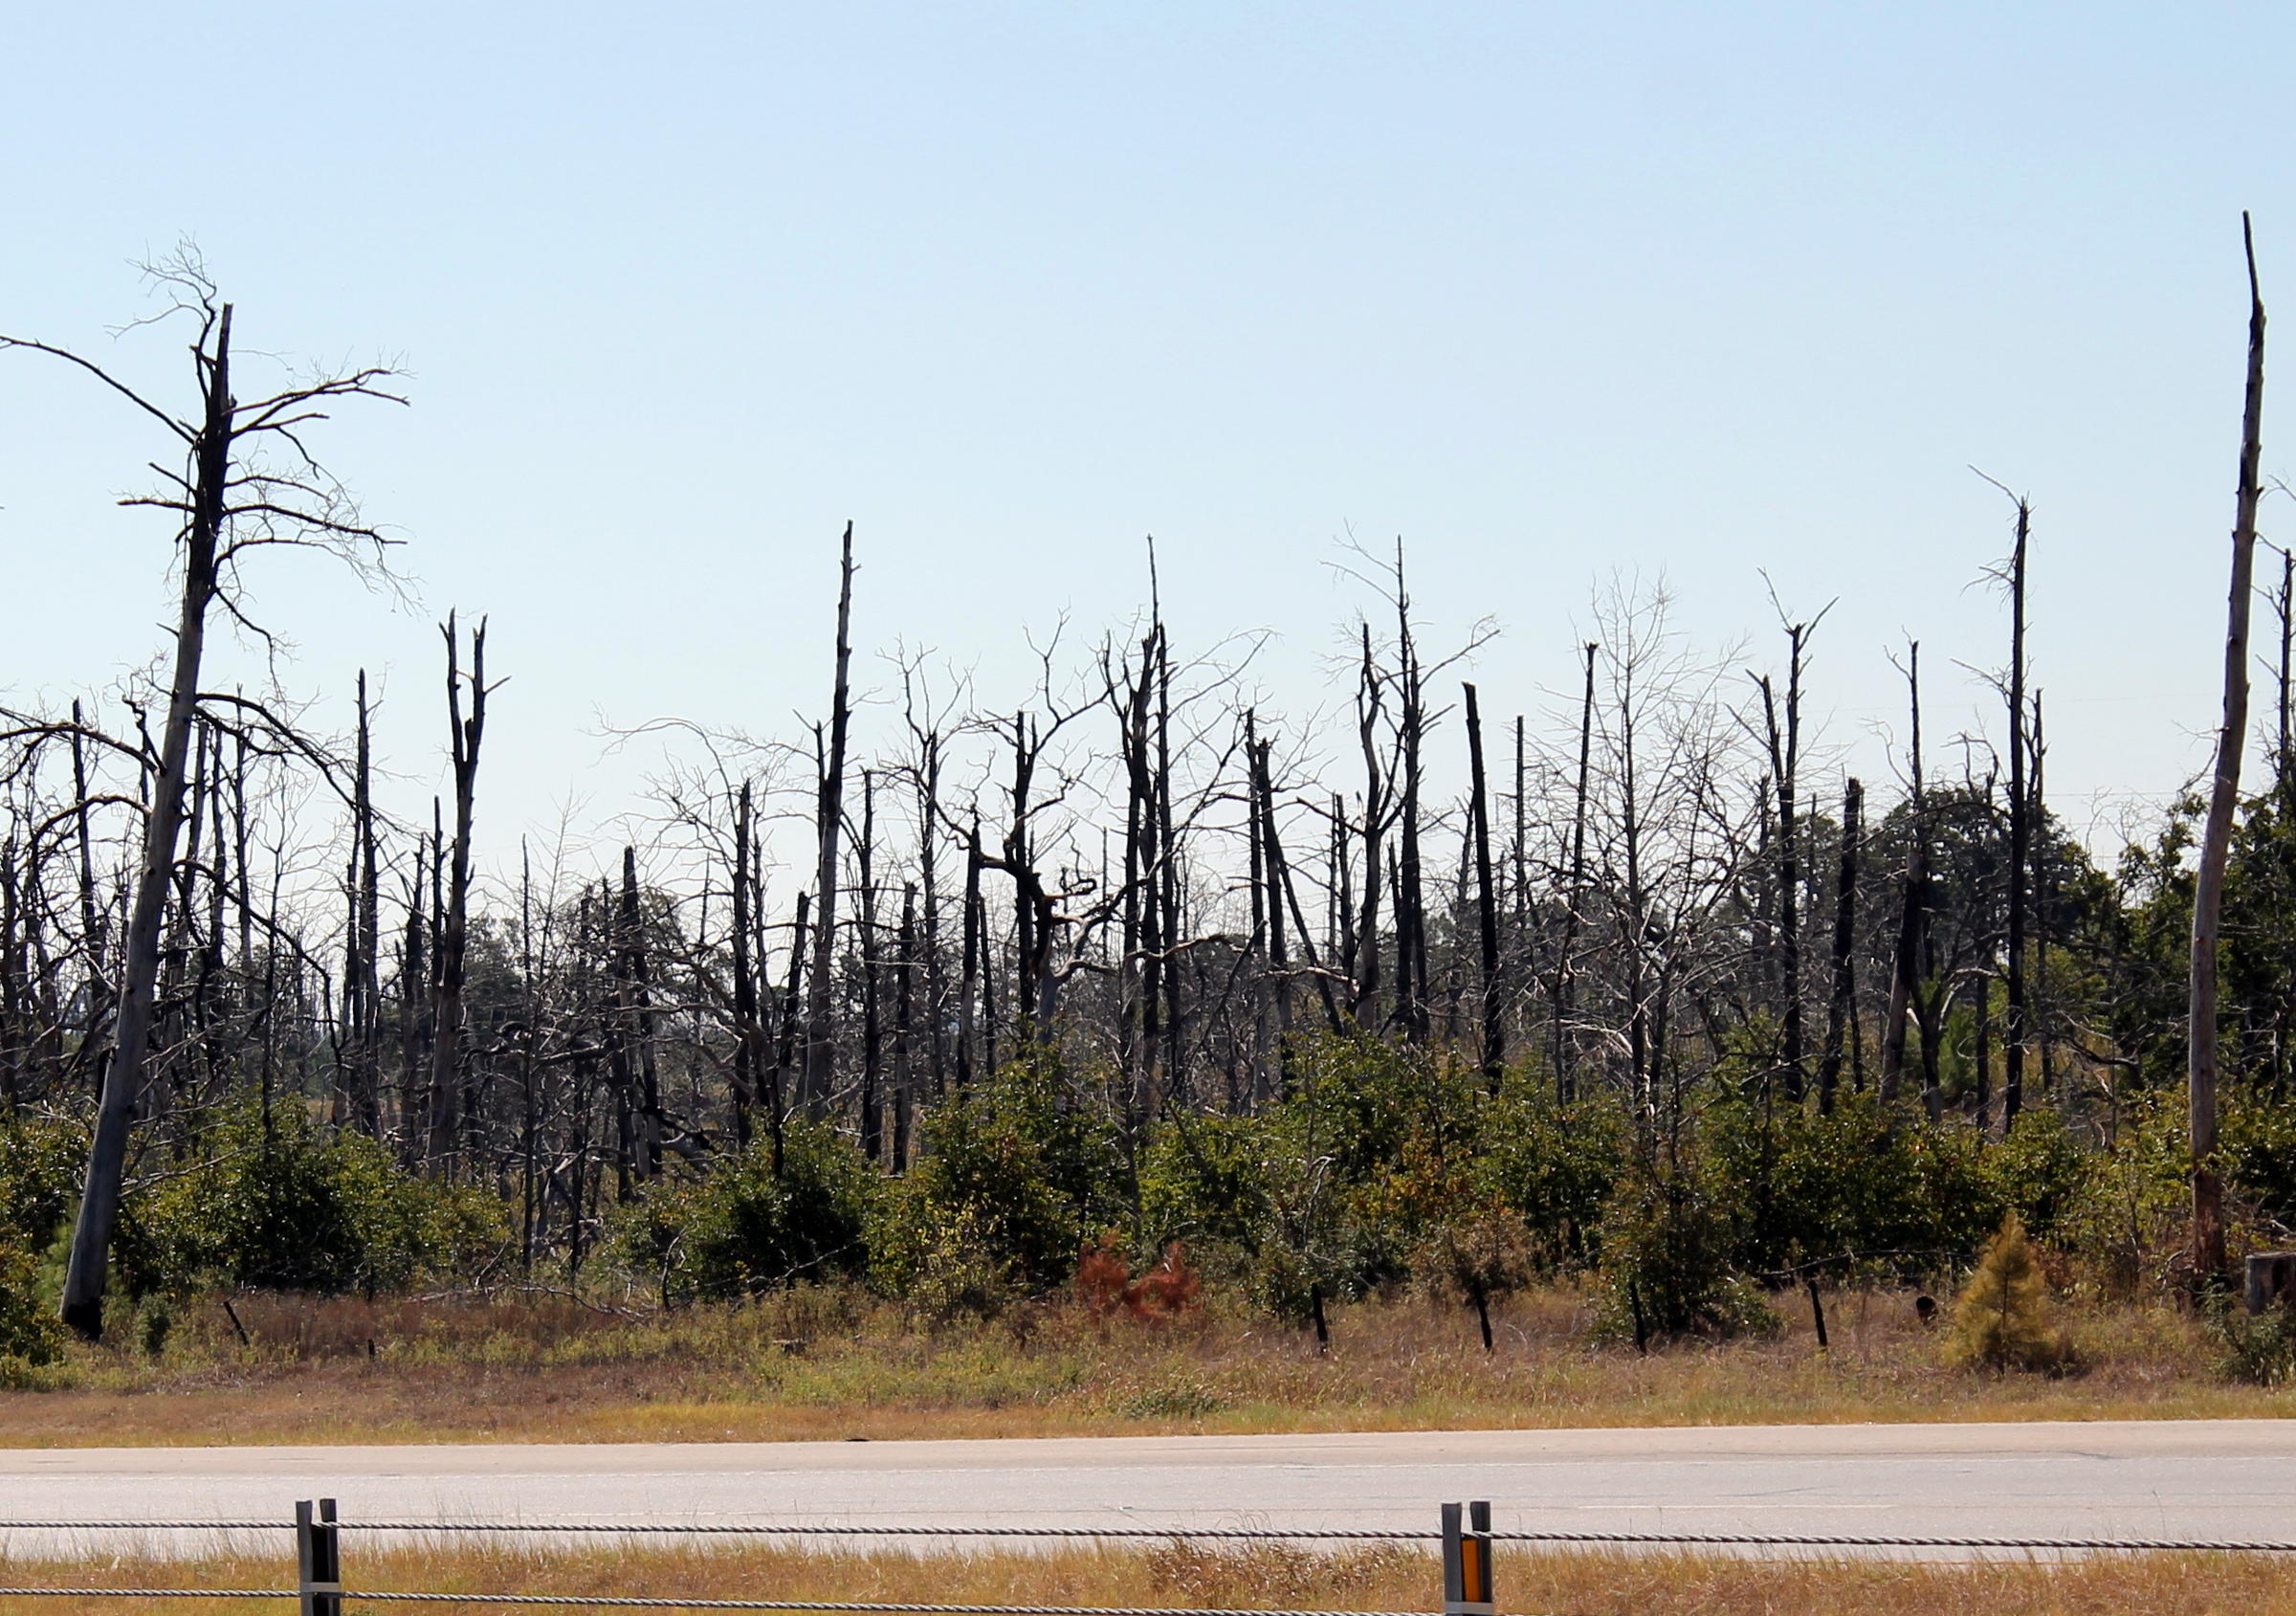 Bastrop County Families That Lost Everything In 2011 Fire Face A